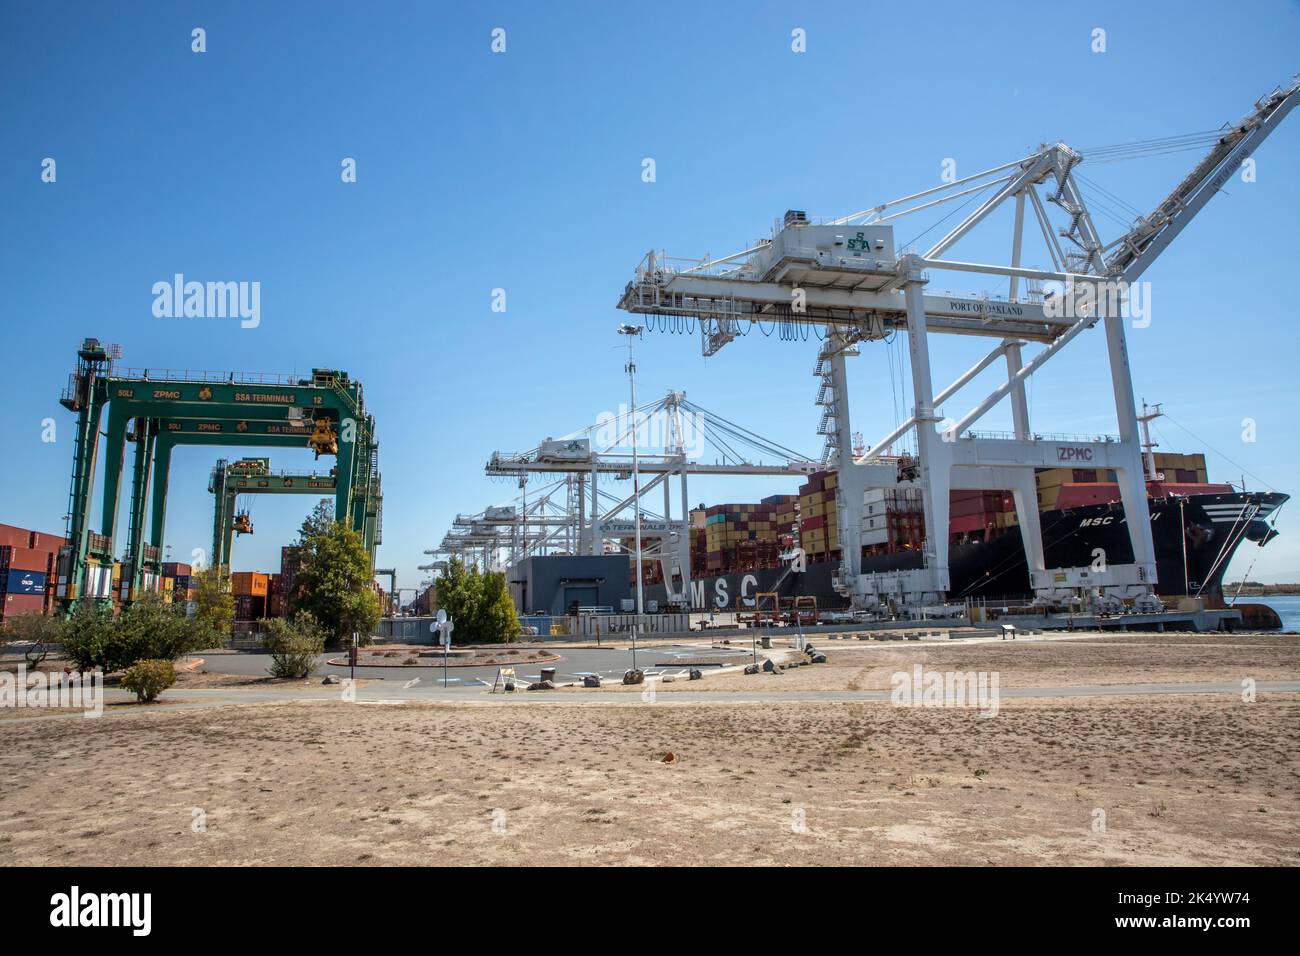 While walking through the Middle Harbor Shoreline Park you can see ships being loaded or unloaded of their containers. Stock Photo